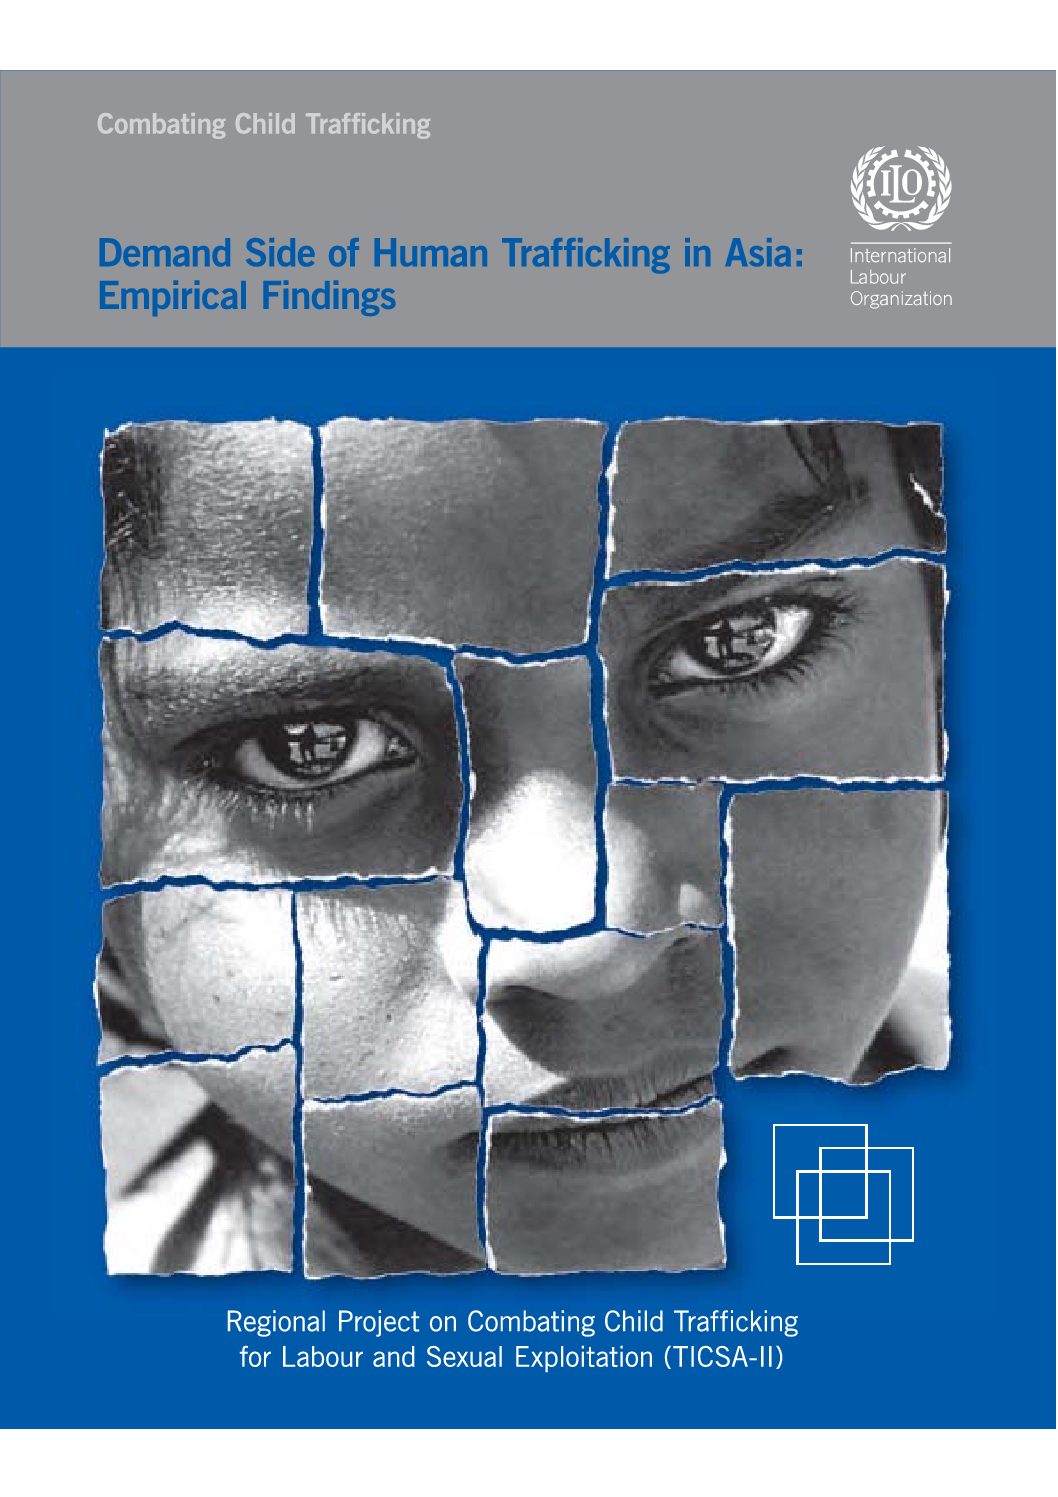 Demand Side of Human Trafficking in Asia: Empirical Findings